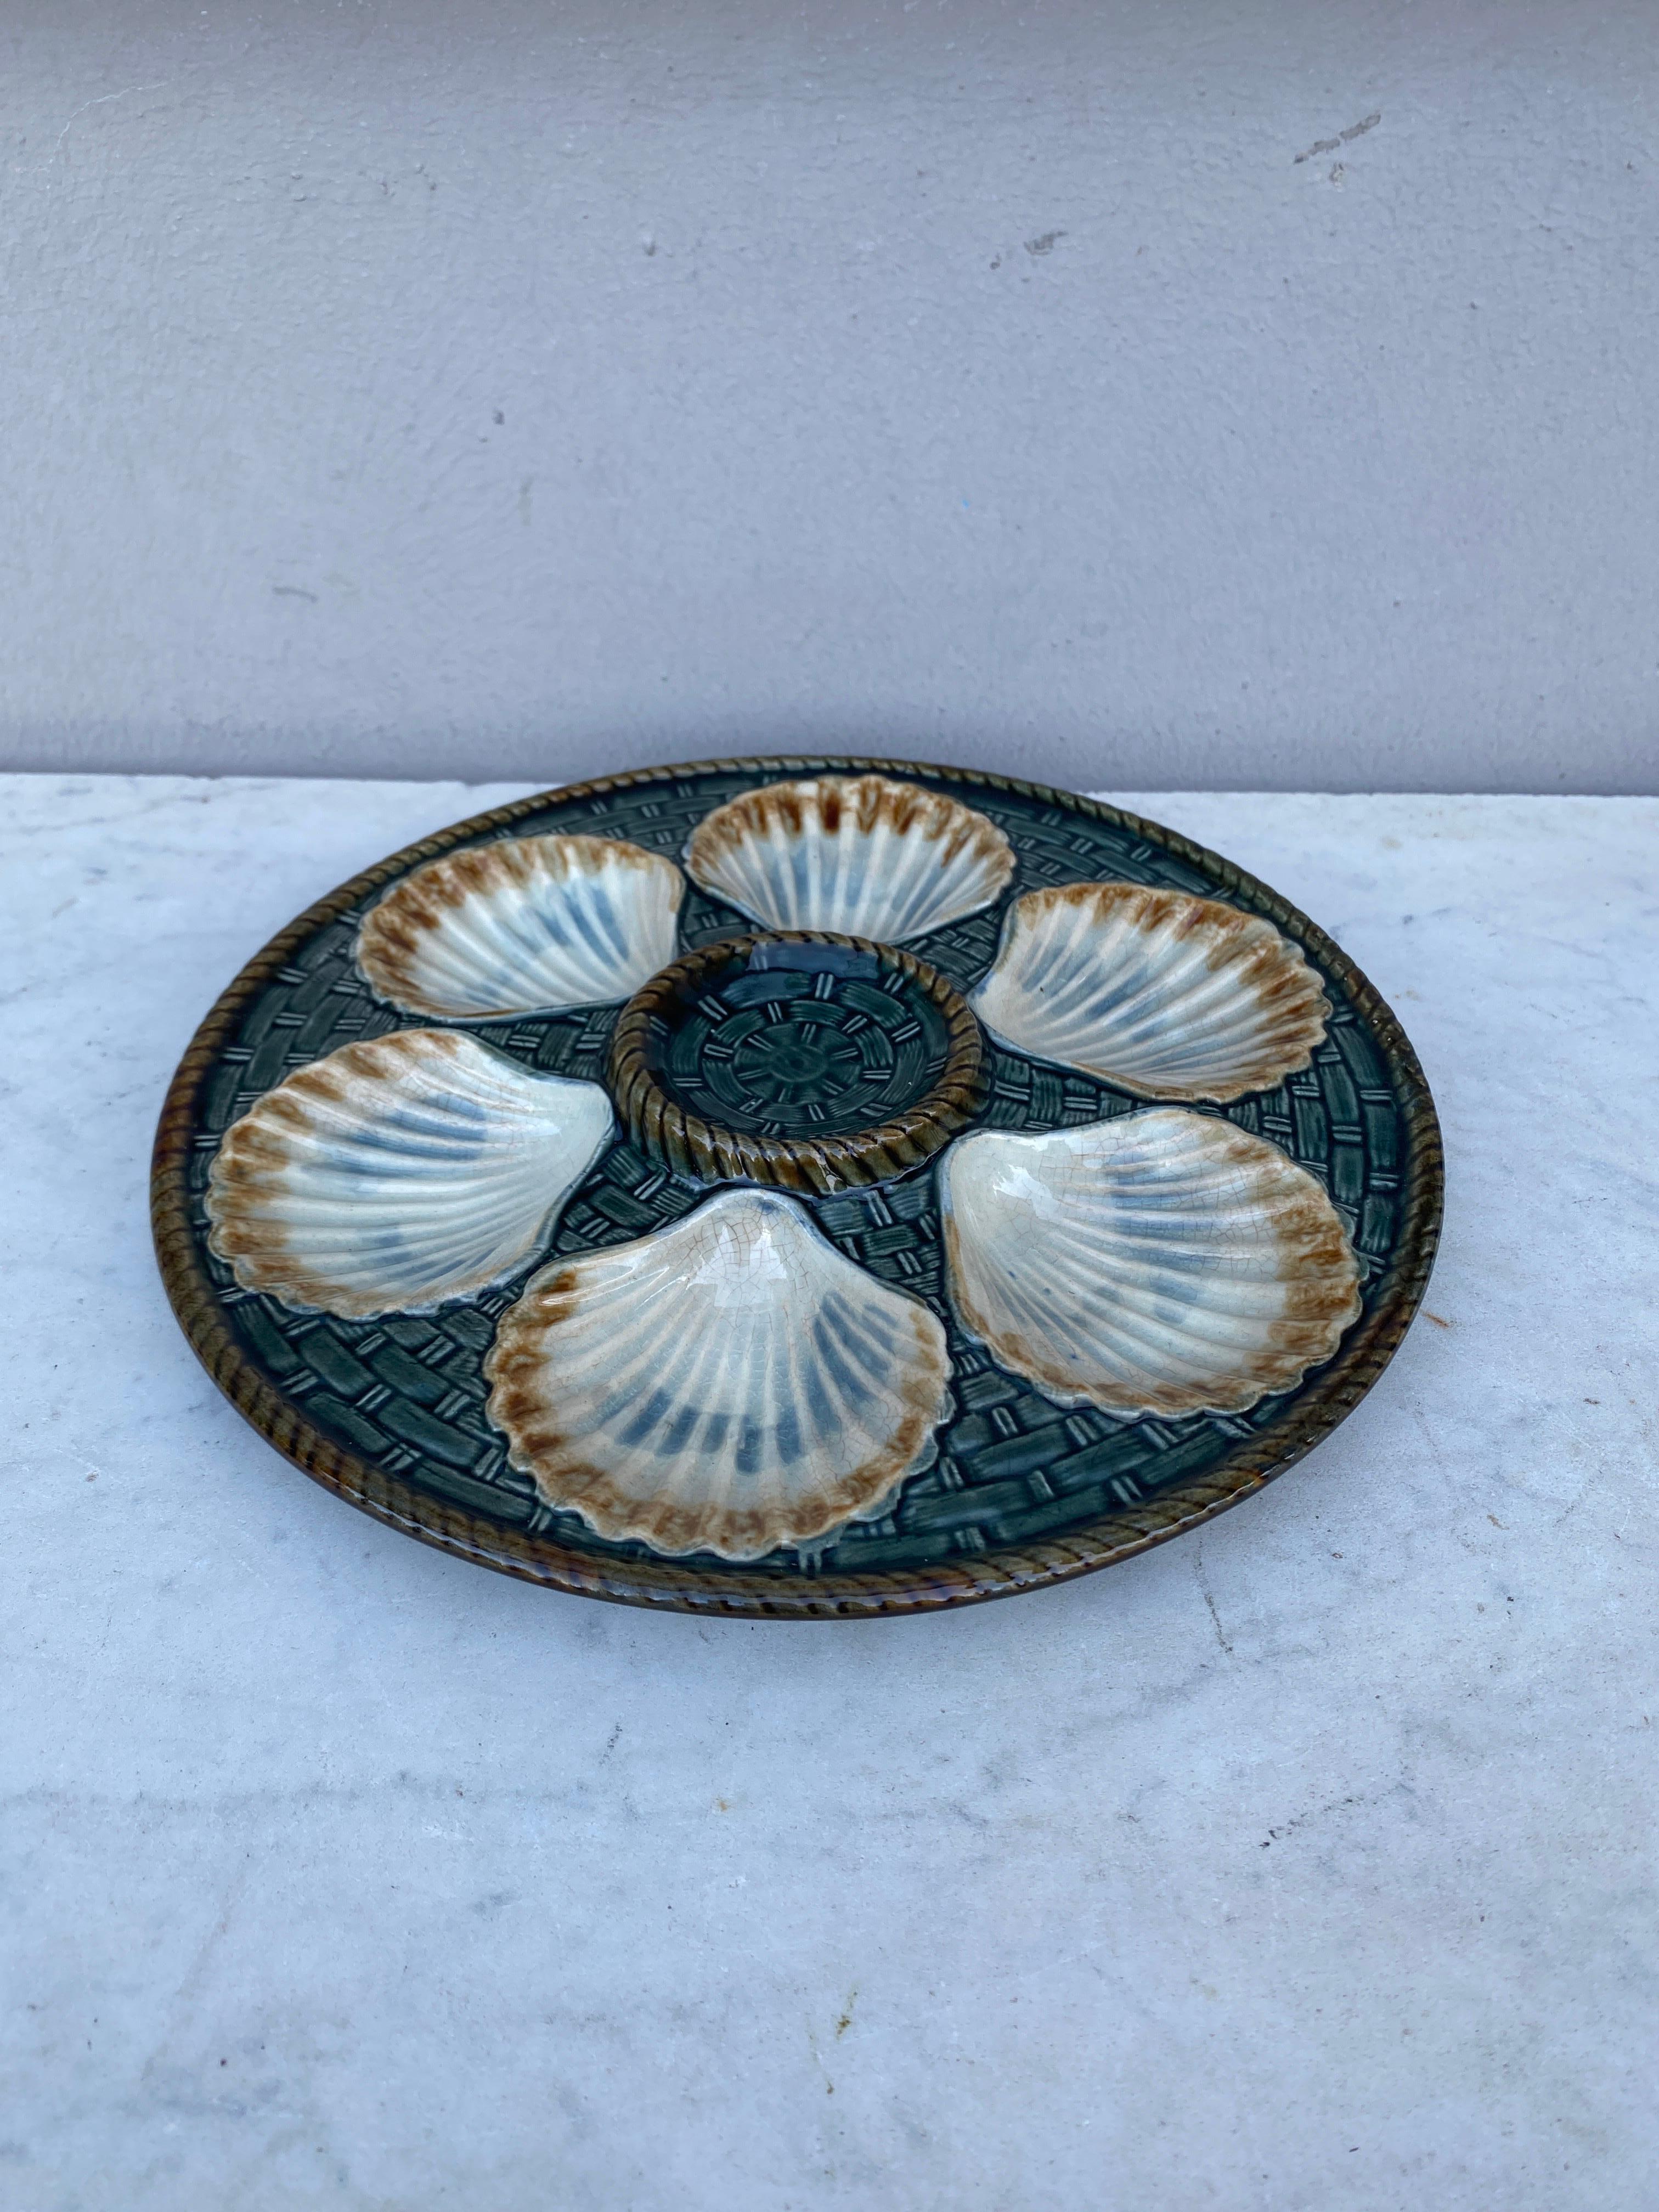 French Provincial 19th Century Majolica Oyster Plate Longchamp